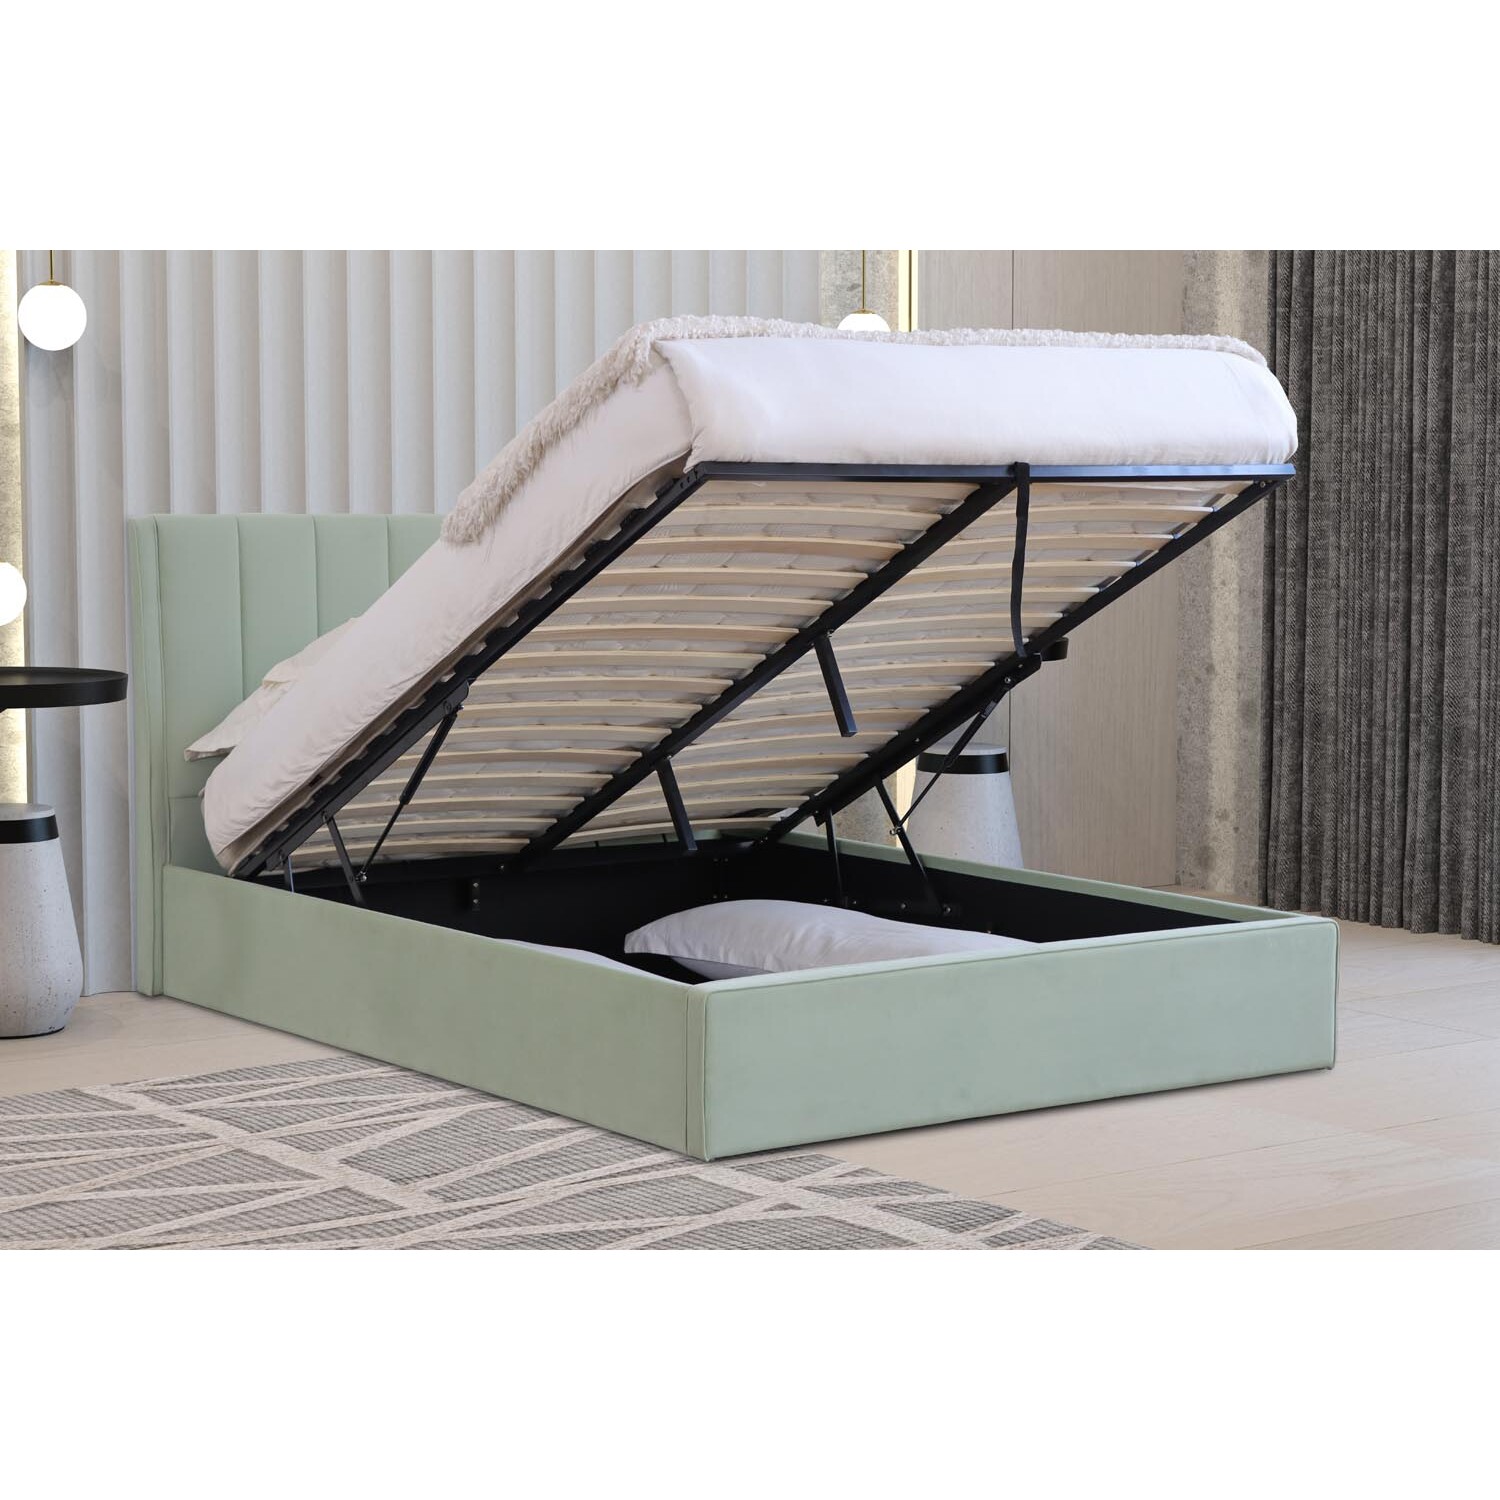 Willow Super King Size Mint Ottoman Bed Image 8